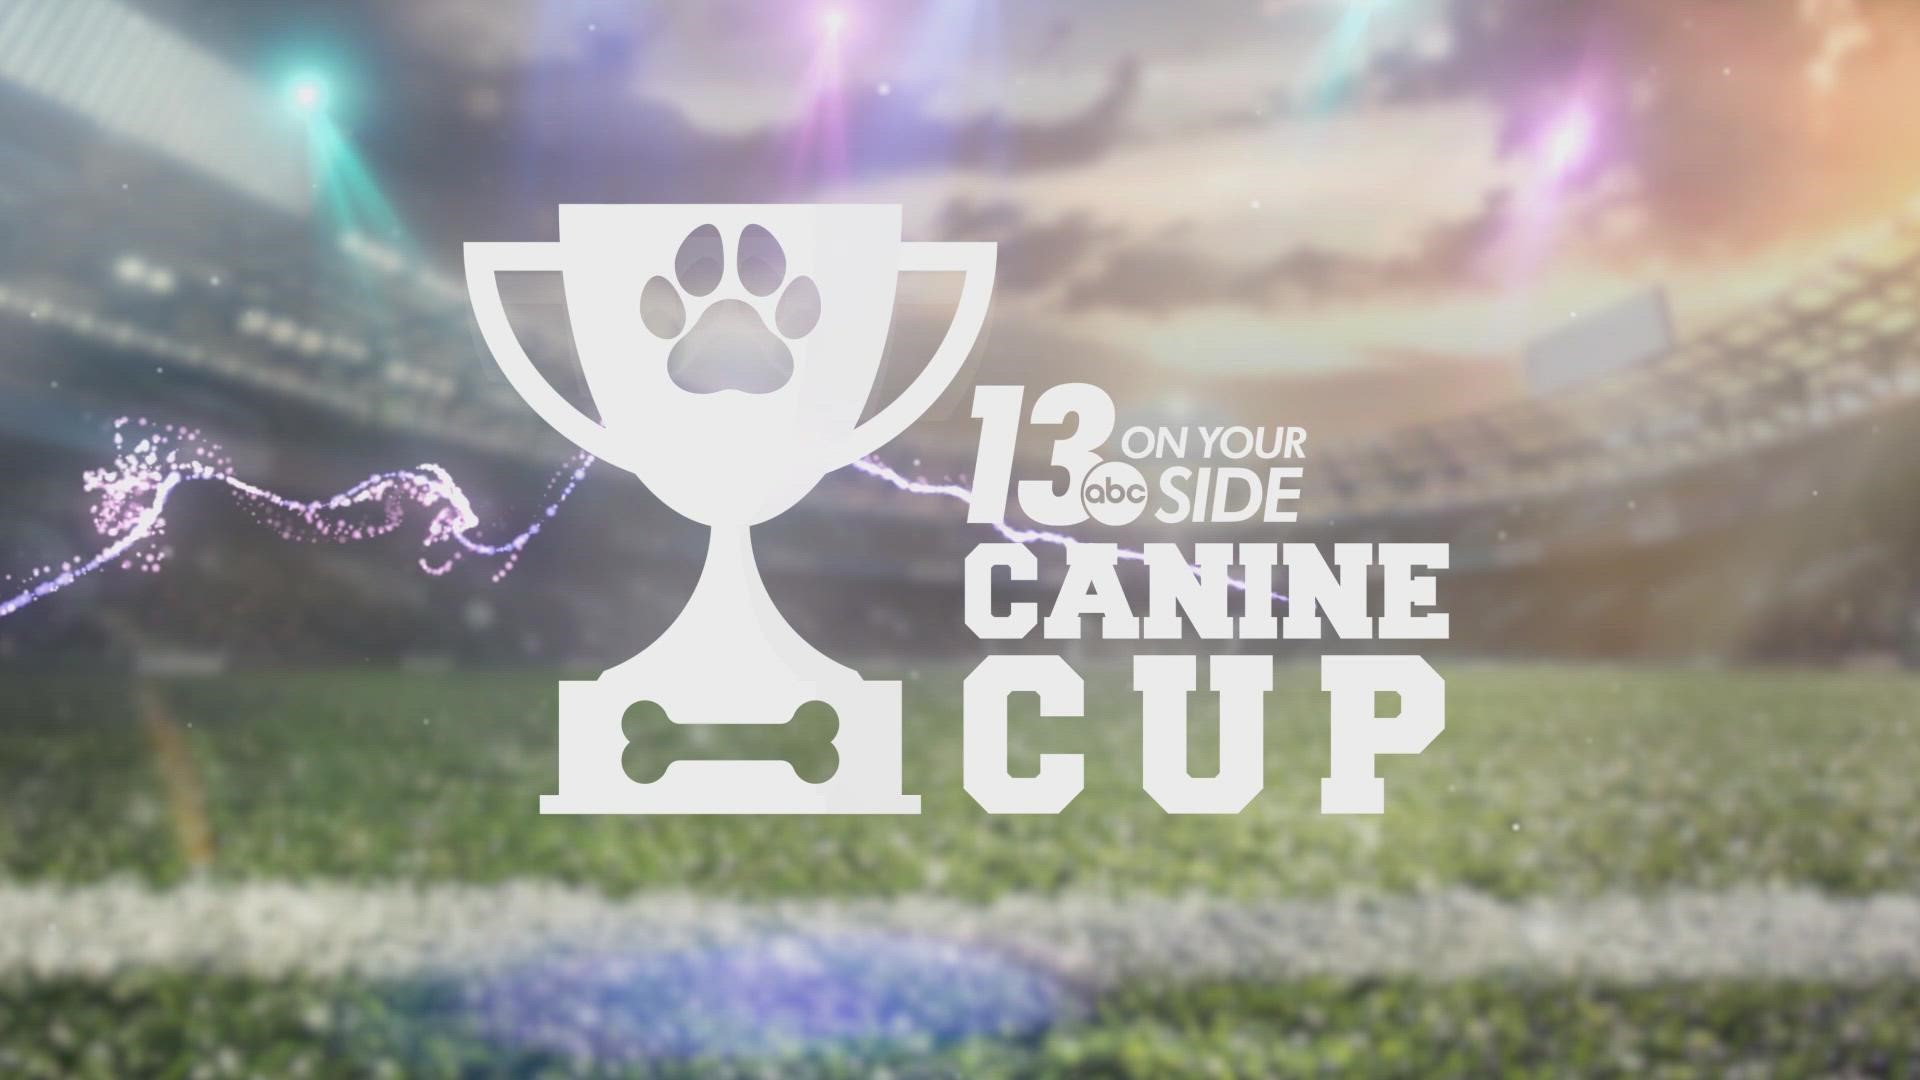 It's back again! The 13 ON YOUR SIDE Canine Cup returns. This time, the Los Angeles Rascals take on the Cincinnati Bone Crushers.